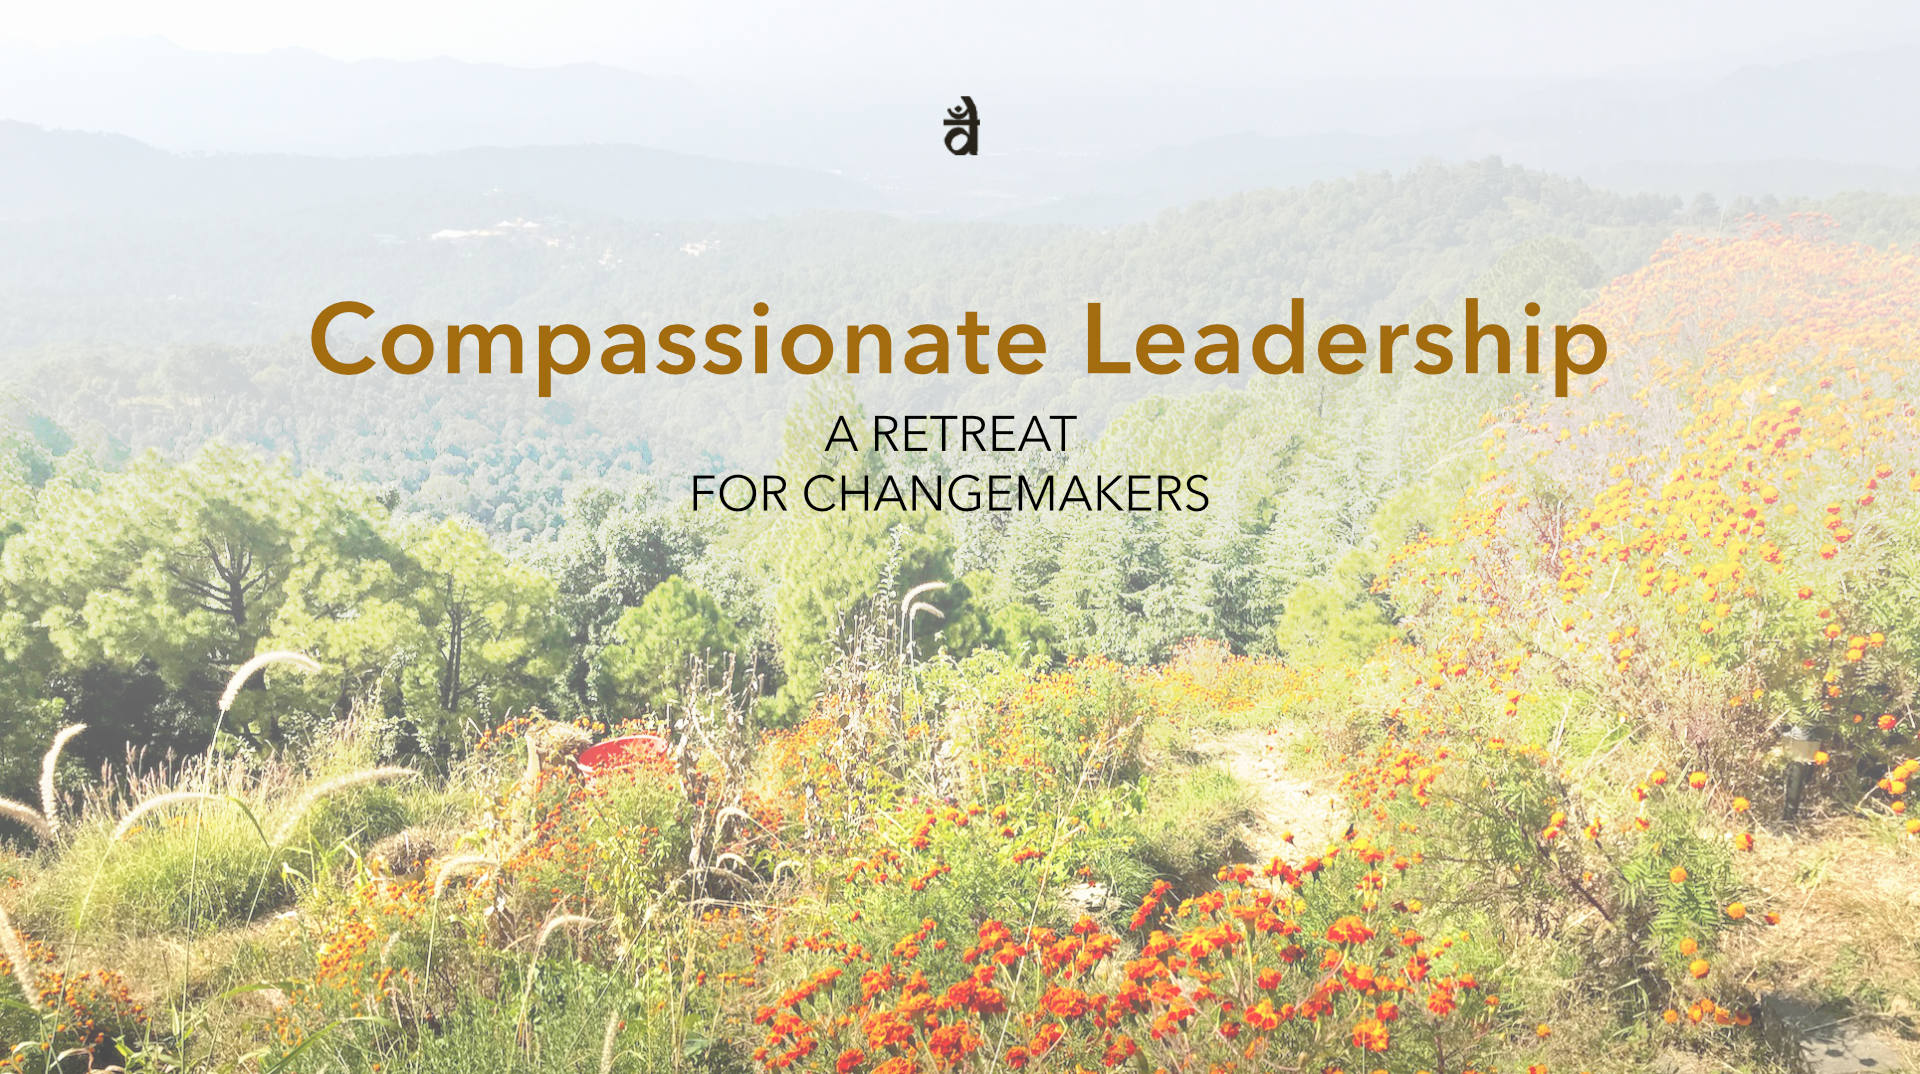 Compassionate Leadership: A Retreat for Changemakers